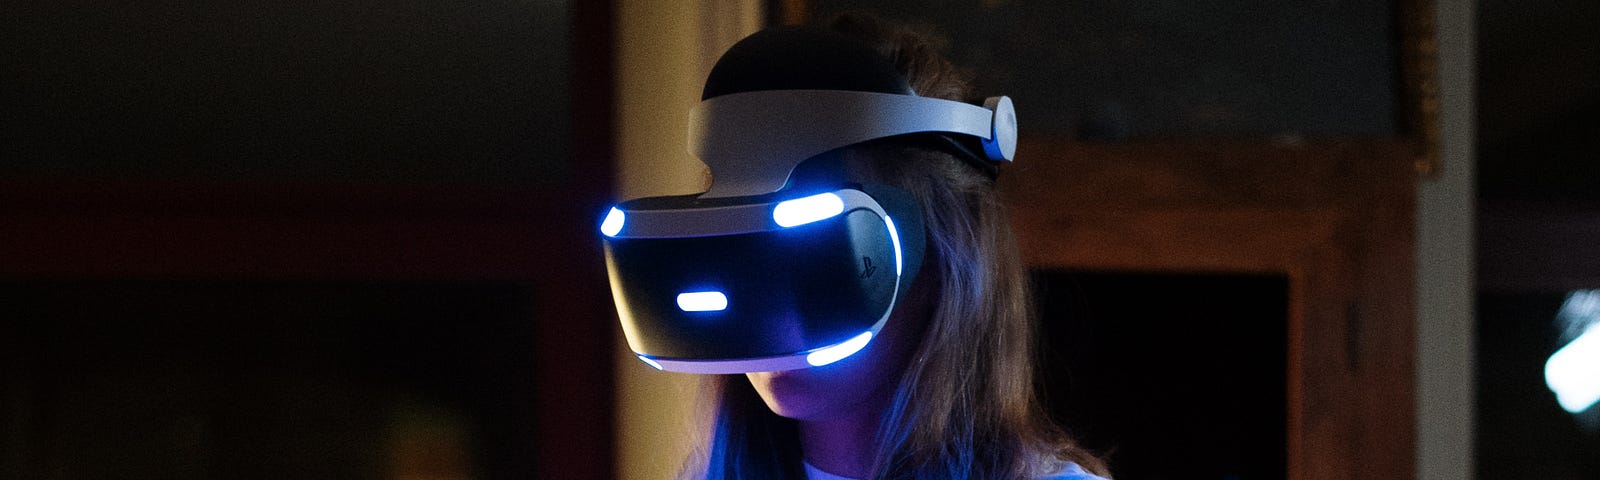 A woman is standing in a room with a VR headset on. It is nighttime.